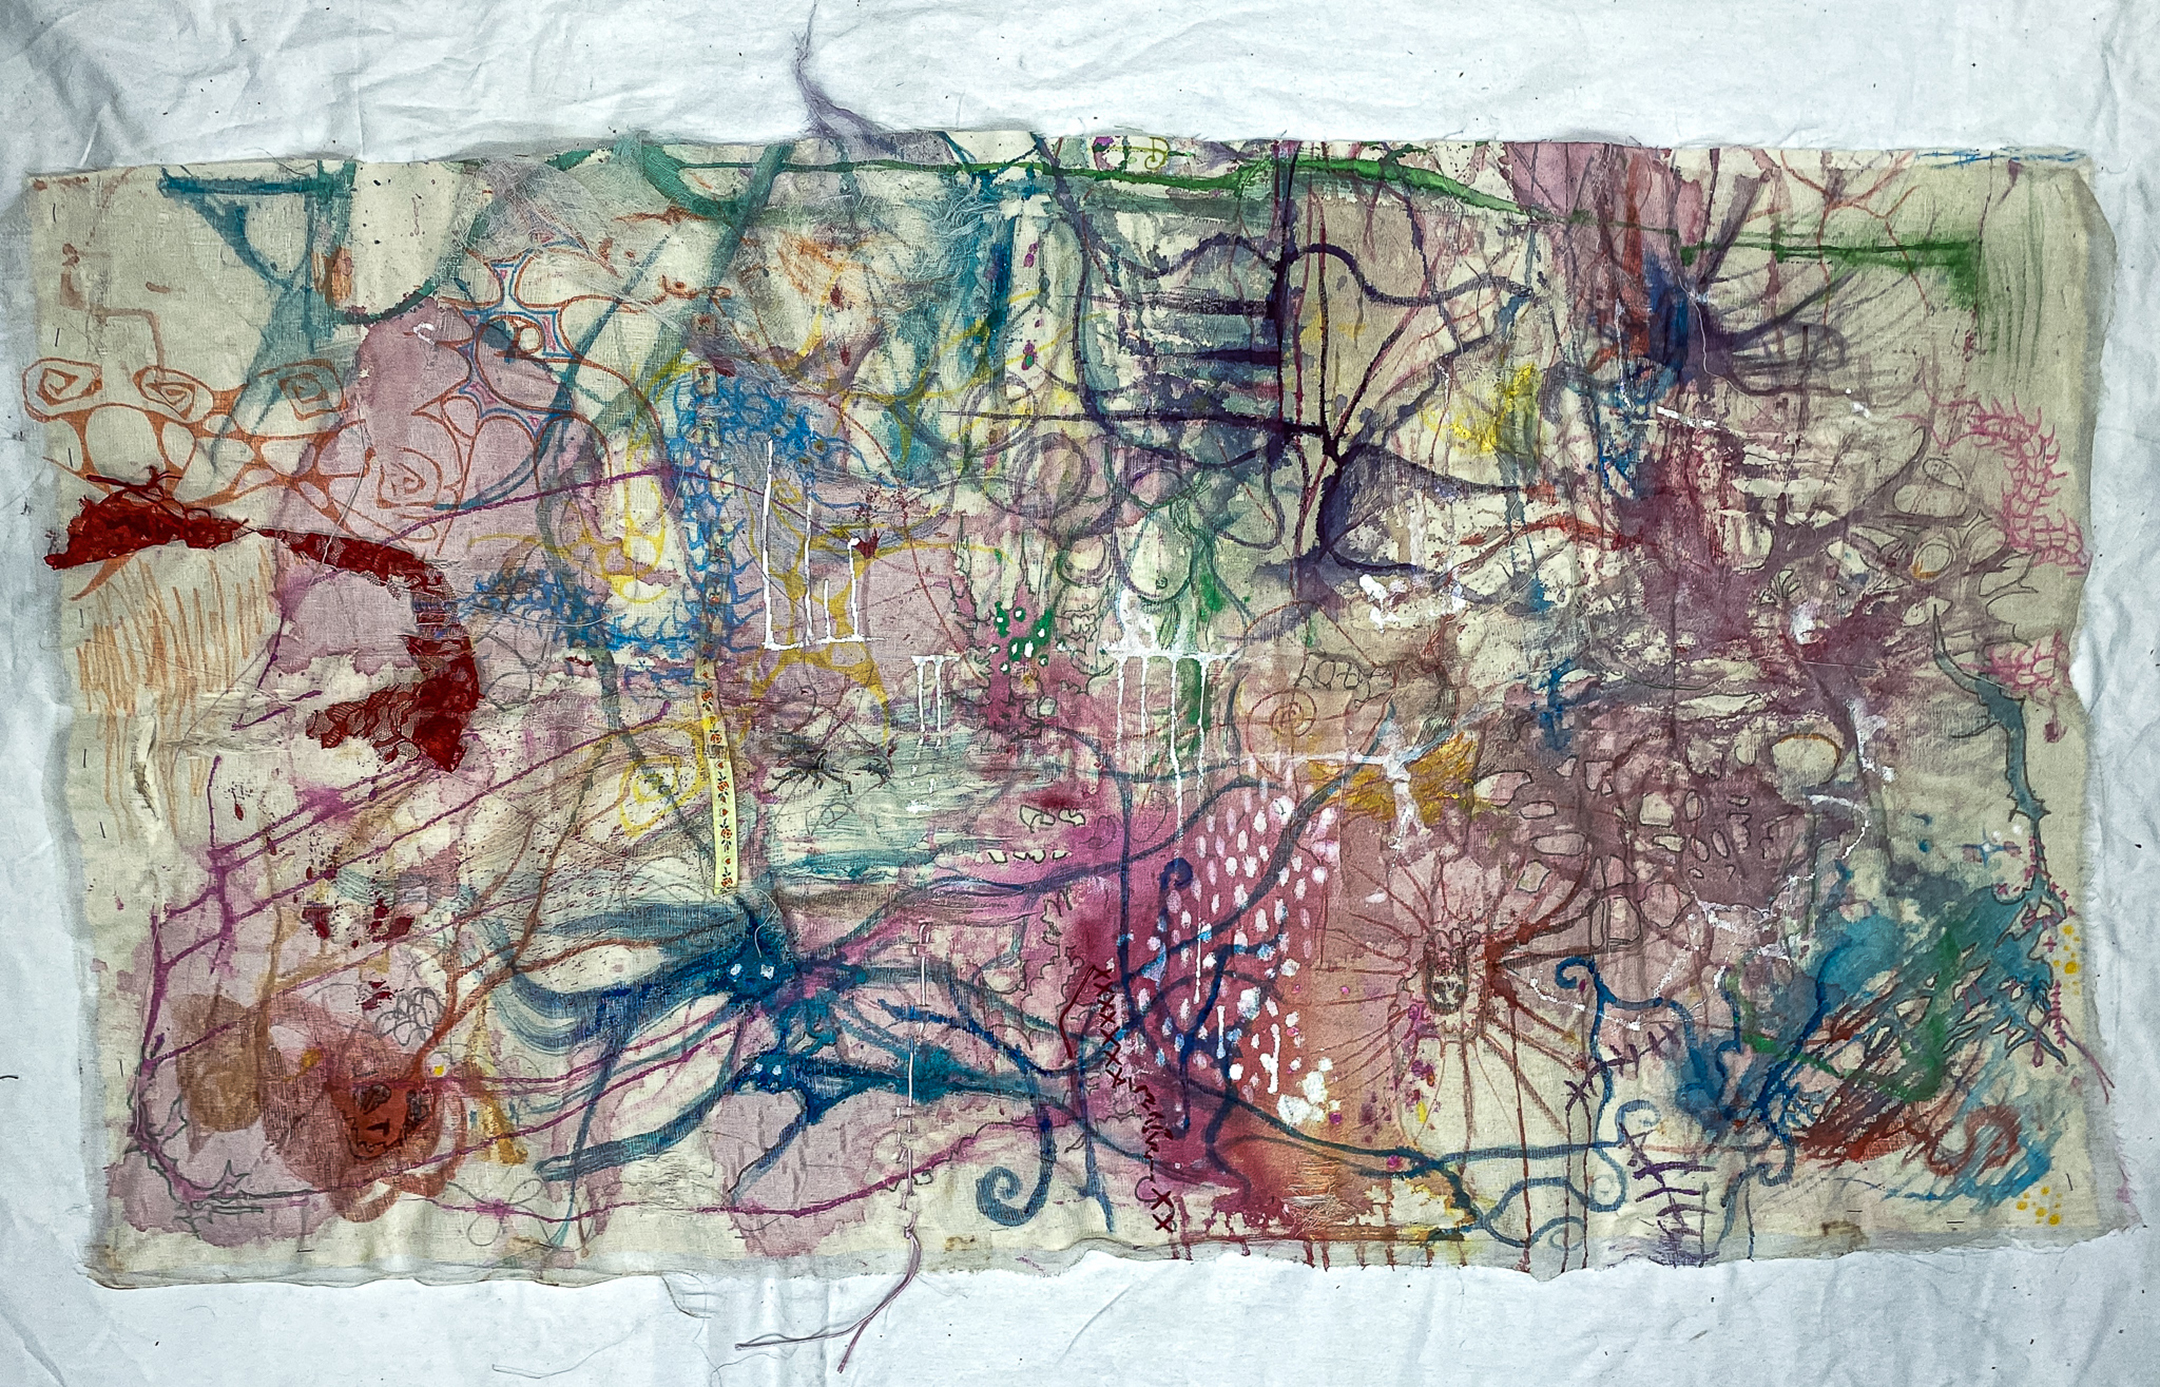 canvas with spidery forms created using fibrous materials, like yarn and thread